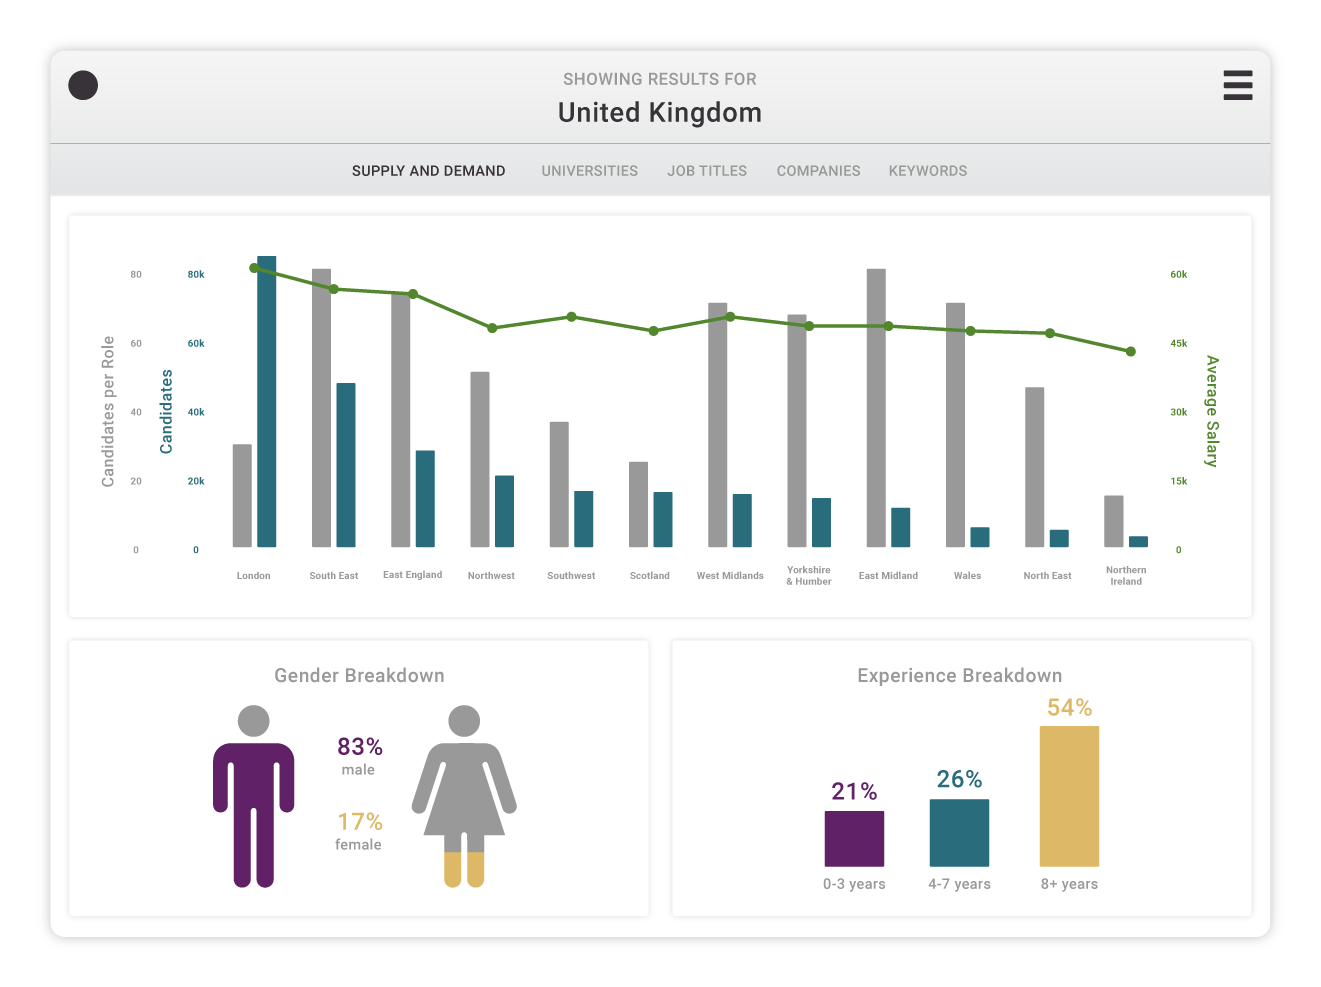 UK Supply and Demand Statistics, Gender Breakdown, and Experience Breakdown Graph